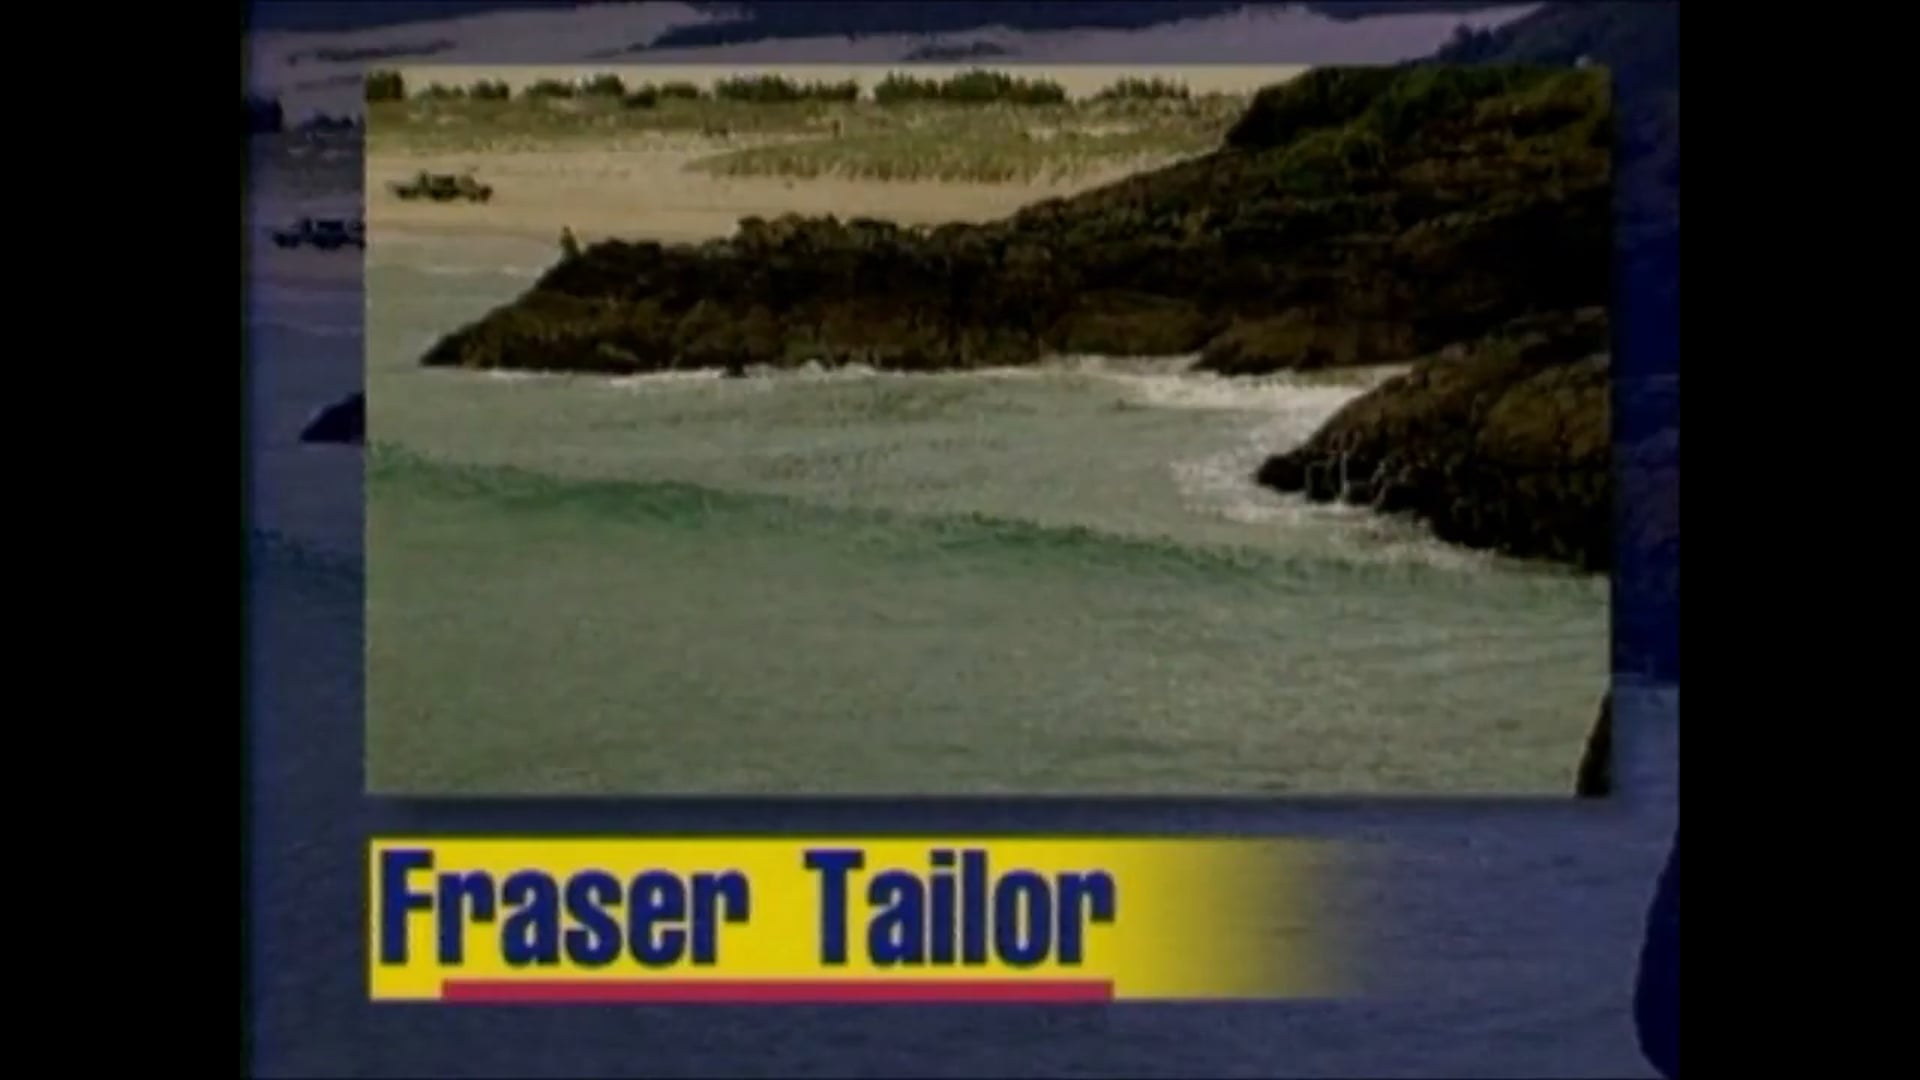 Fraser Is. Tailor off the Rocks – Martin Cowling